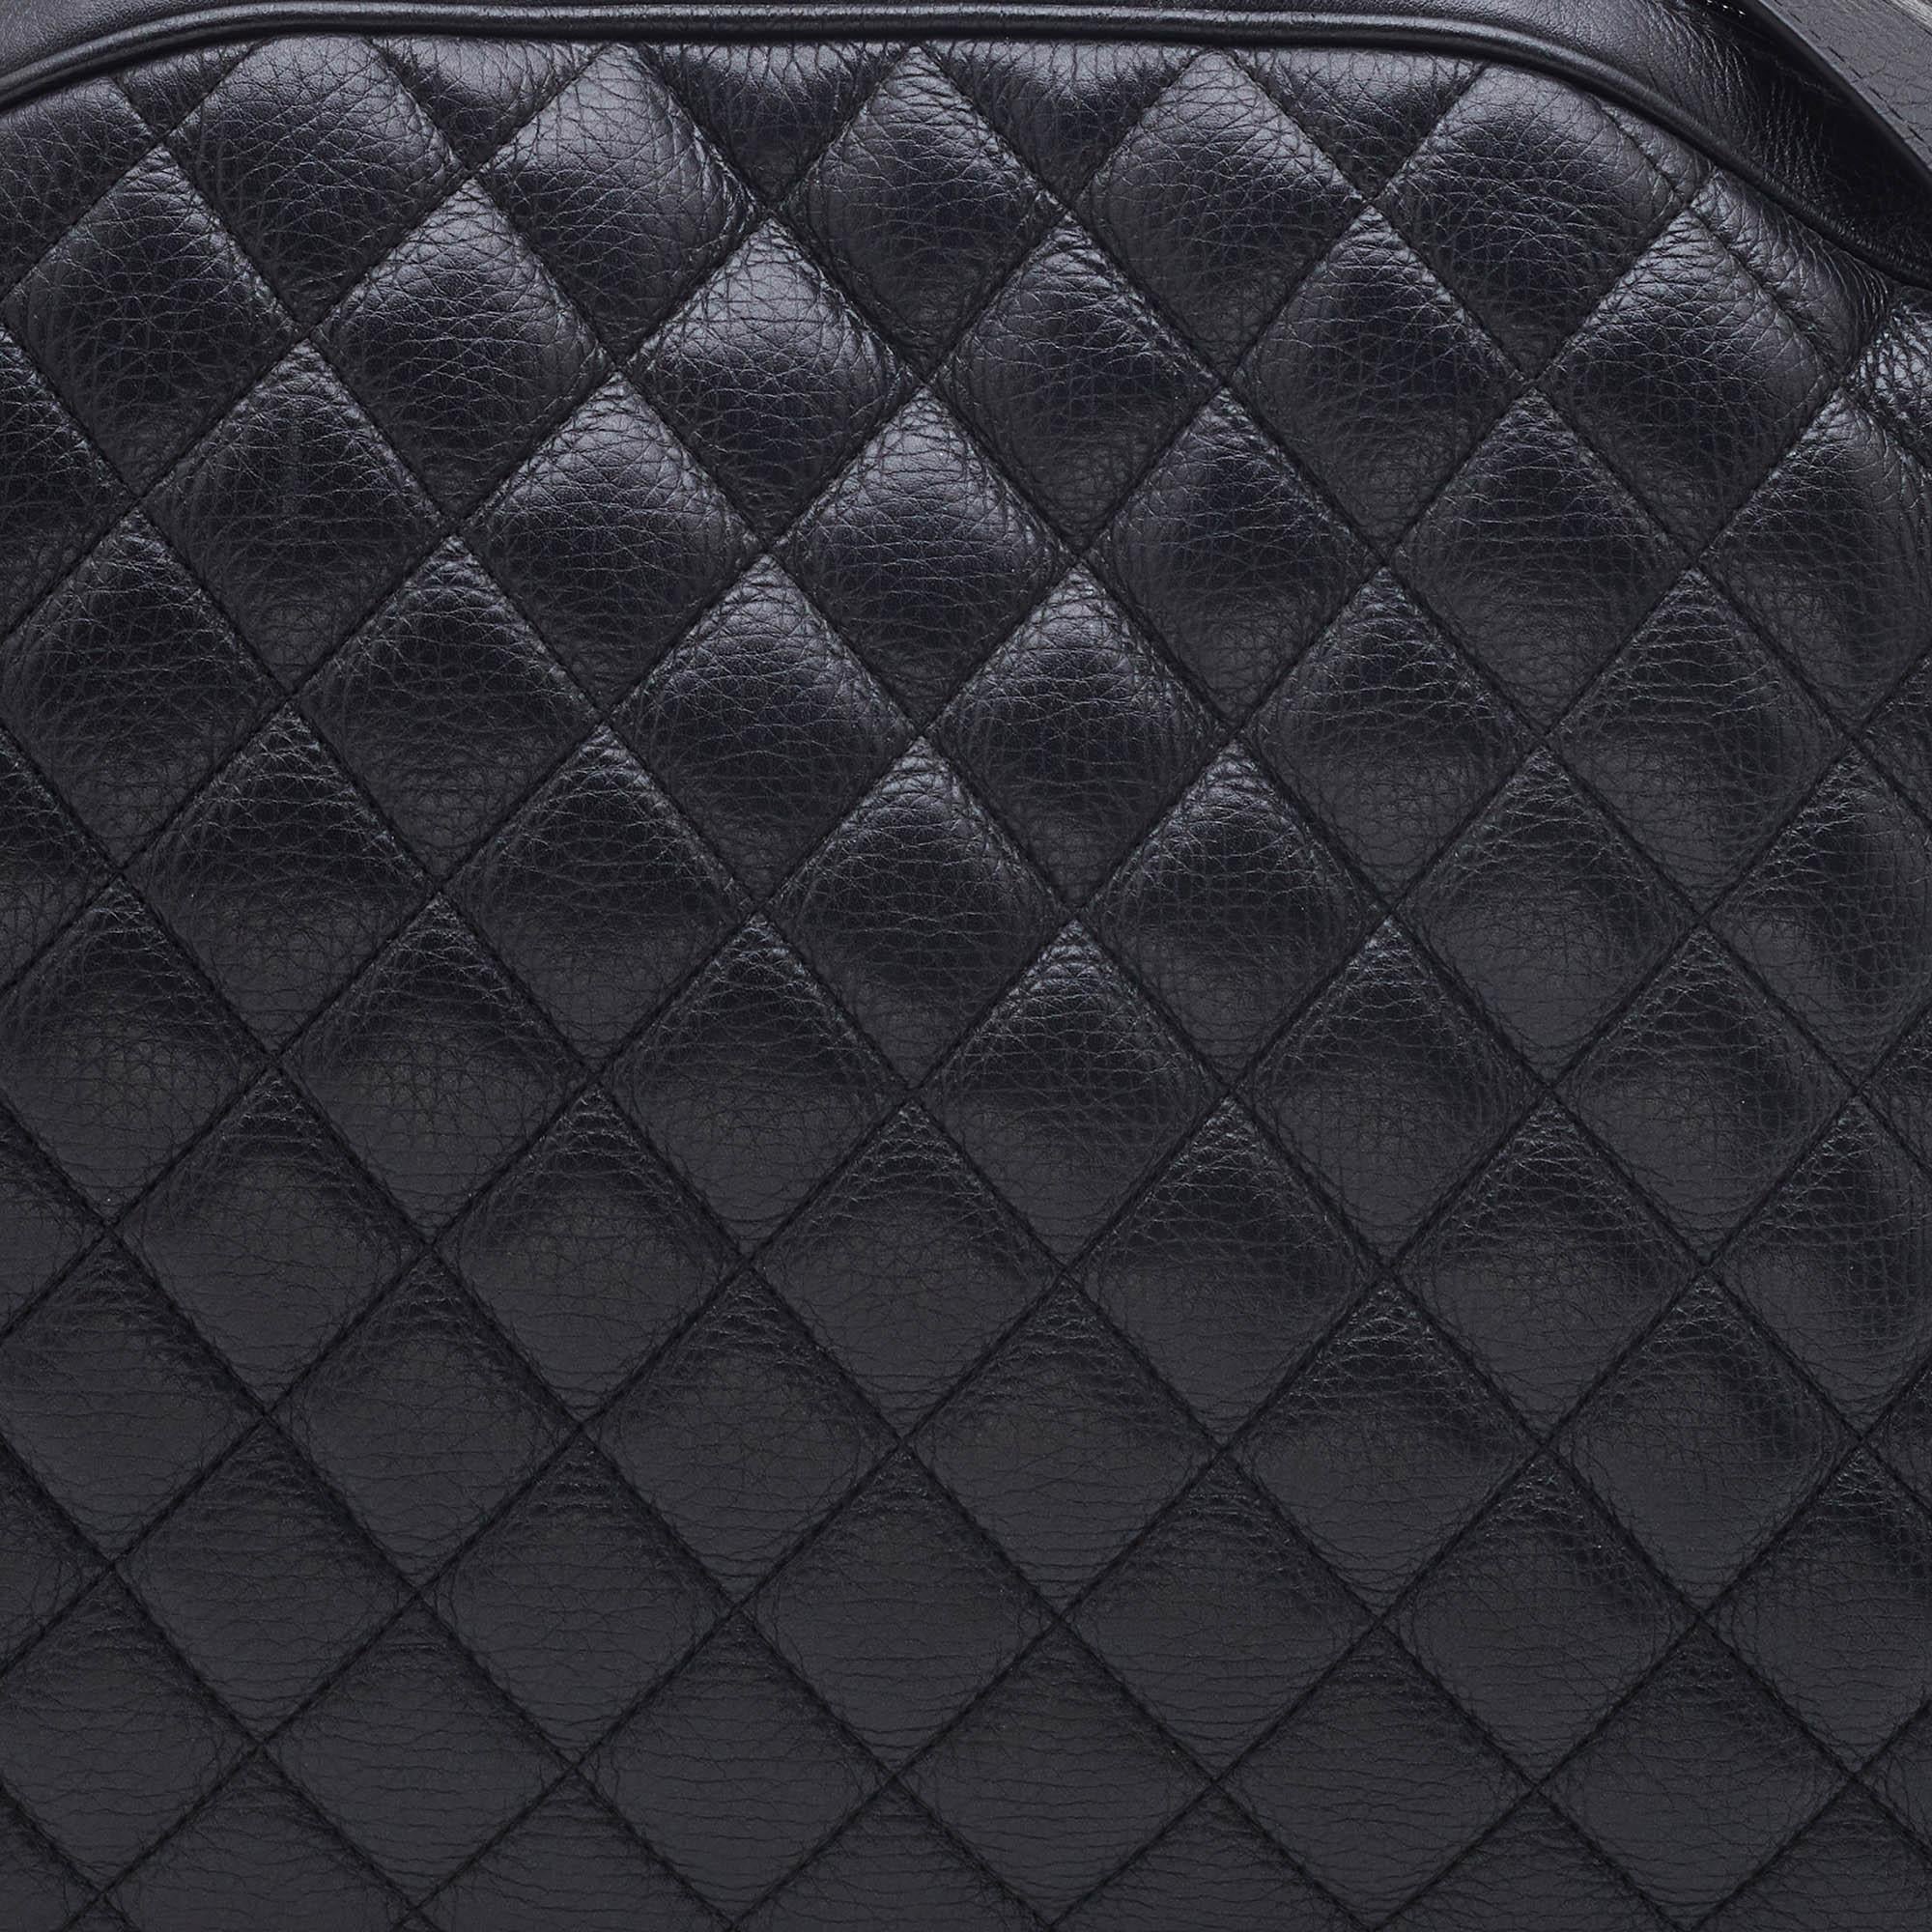 Chanel Black Quilted Leather Large Airlines Round Trip Bag 6